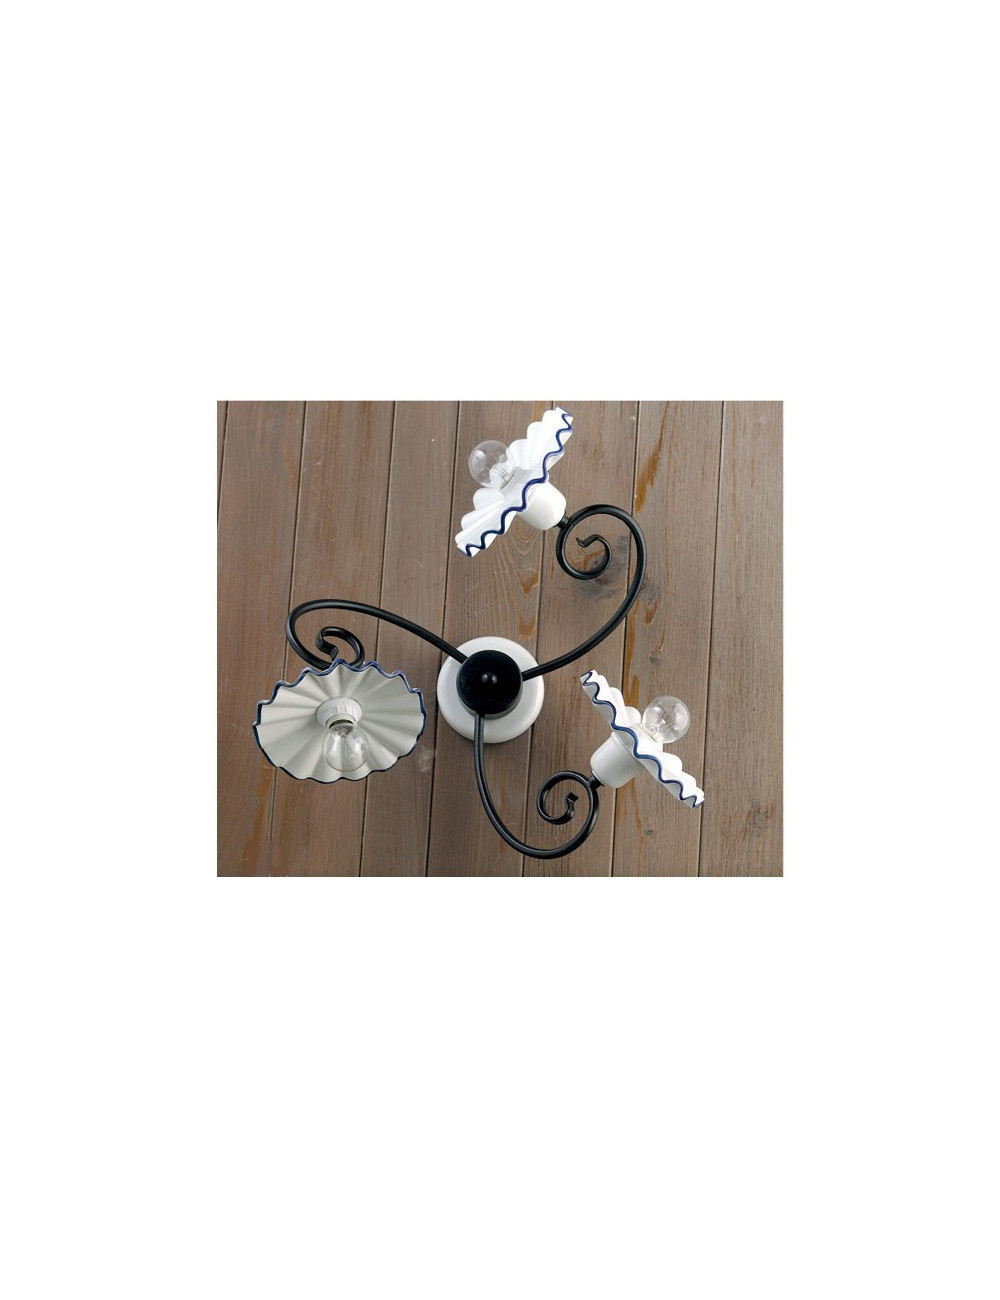 GIULIA Ceiling light Rustic Chandelier ceiling Iron and hand-Decorated Ceramics